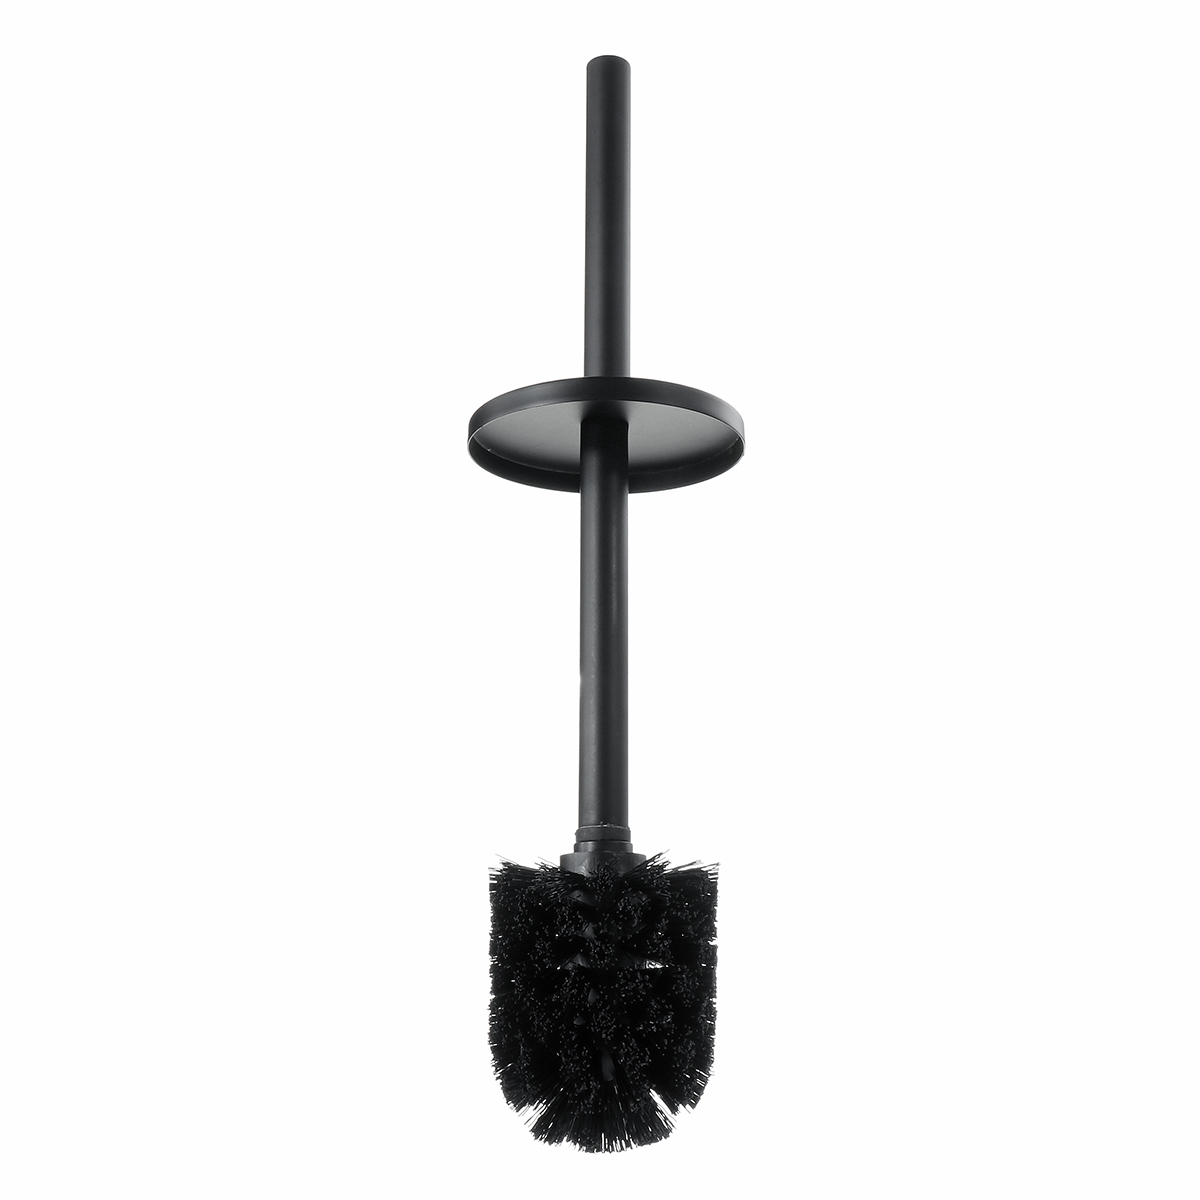 Toilet-Cleaning-Brushes-Wall-mounted-Stainless-Steel-Handle-Toilet-Bathroom-Easy-install-1600807-6